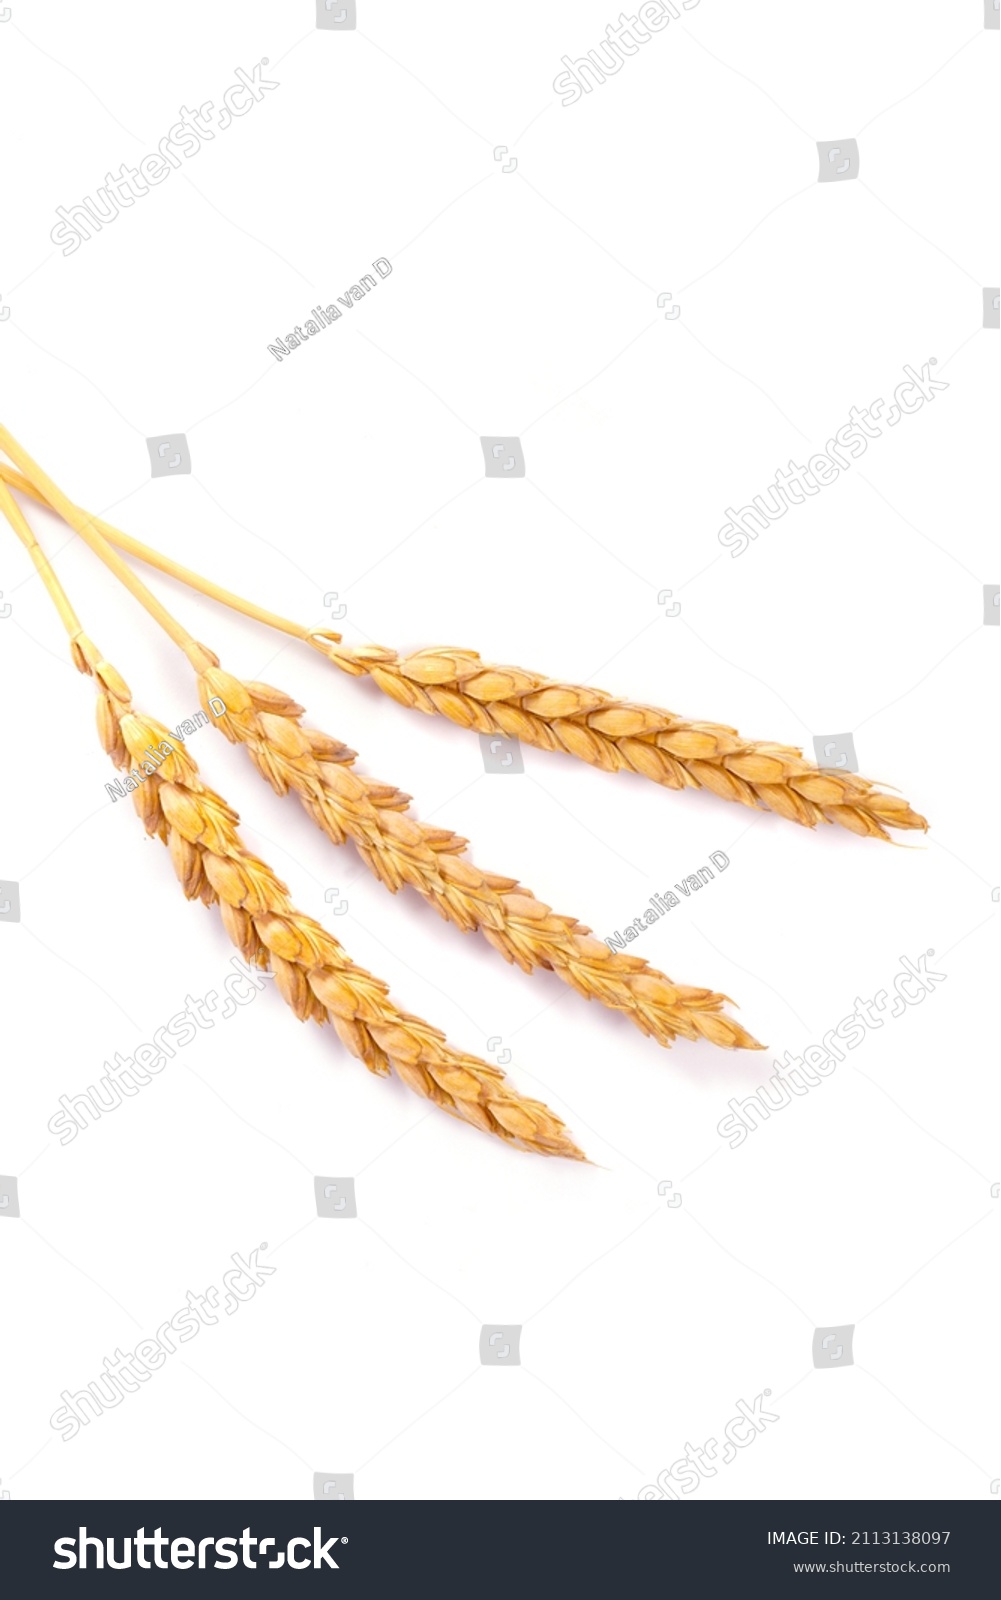 a bright closeup of a bunch of golden ripe dinkel hulled wheat Spelt Spelt (Triticum spelta dicoccum) rye grain relict crop health food ready for harvest isolated on white #2113138097